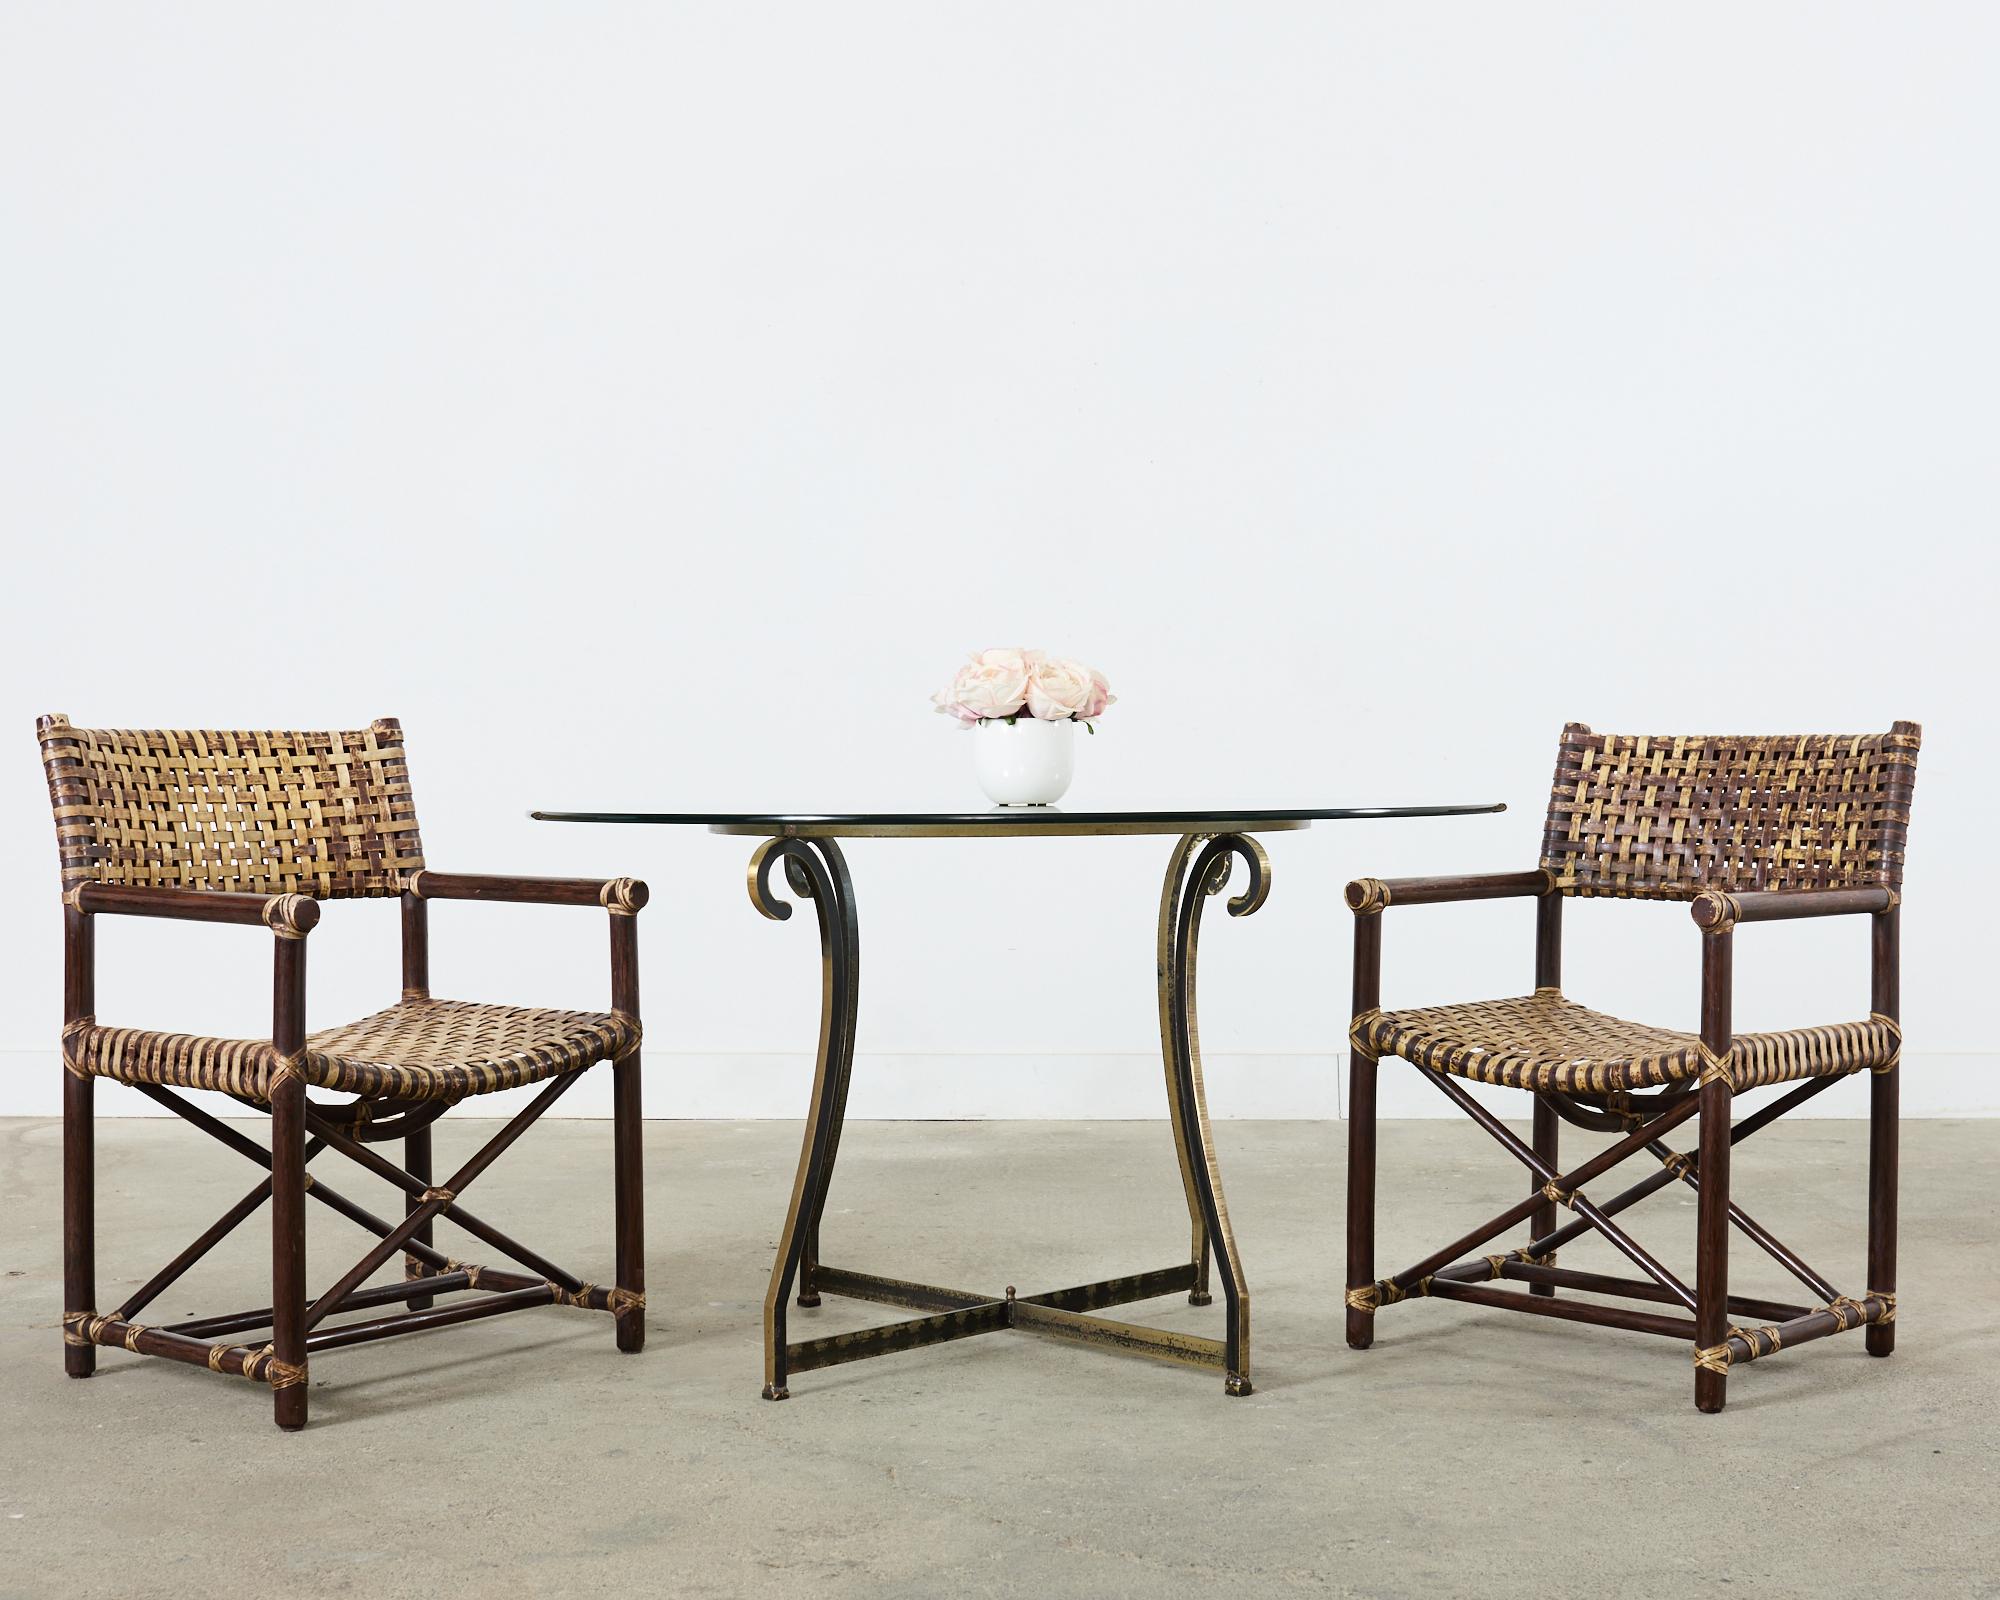 Distinctive set of six laced leather rawhide and rattan dining armchairs made in the California coastal organic modern style by McGuire. The Antalya armchairs (Model #MCLM45) feature rattan pole frames reinforced with woven leather rawhide laces